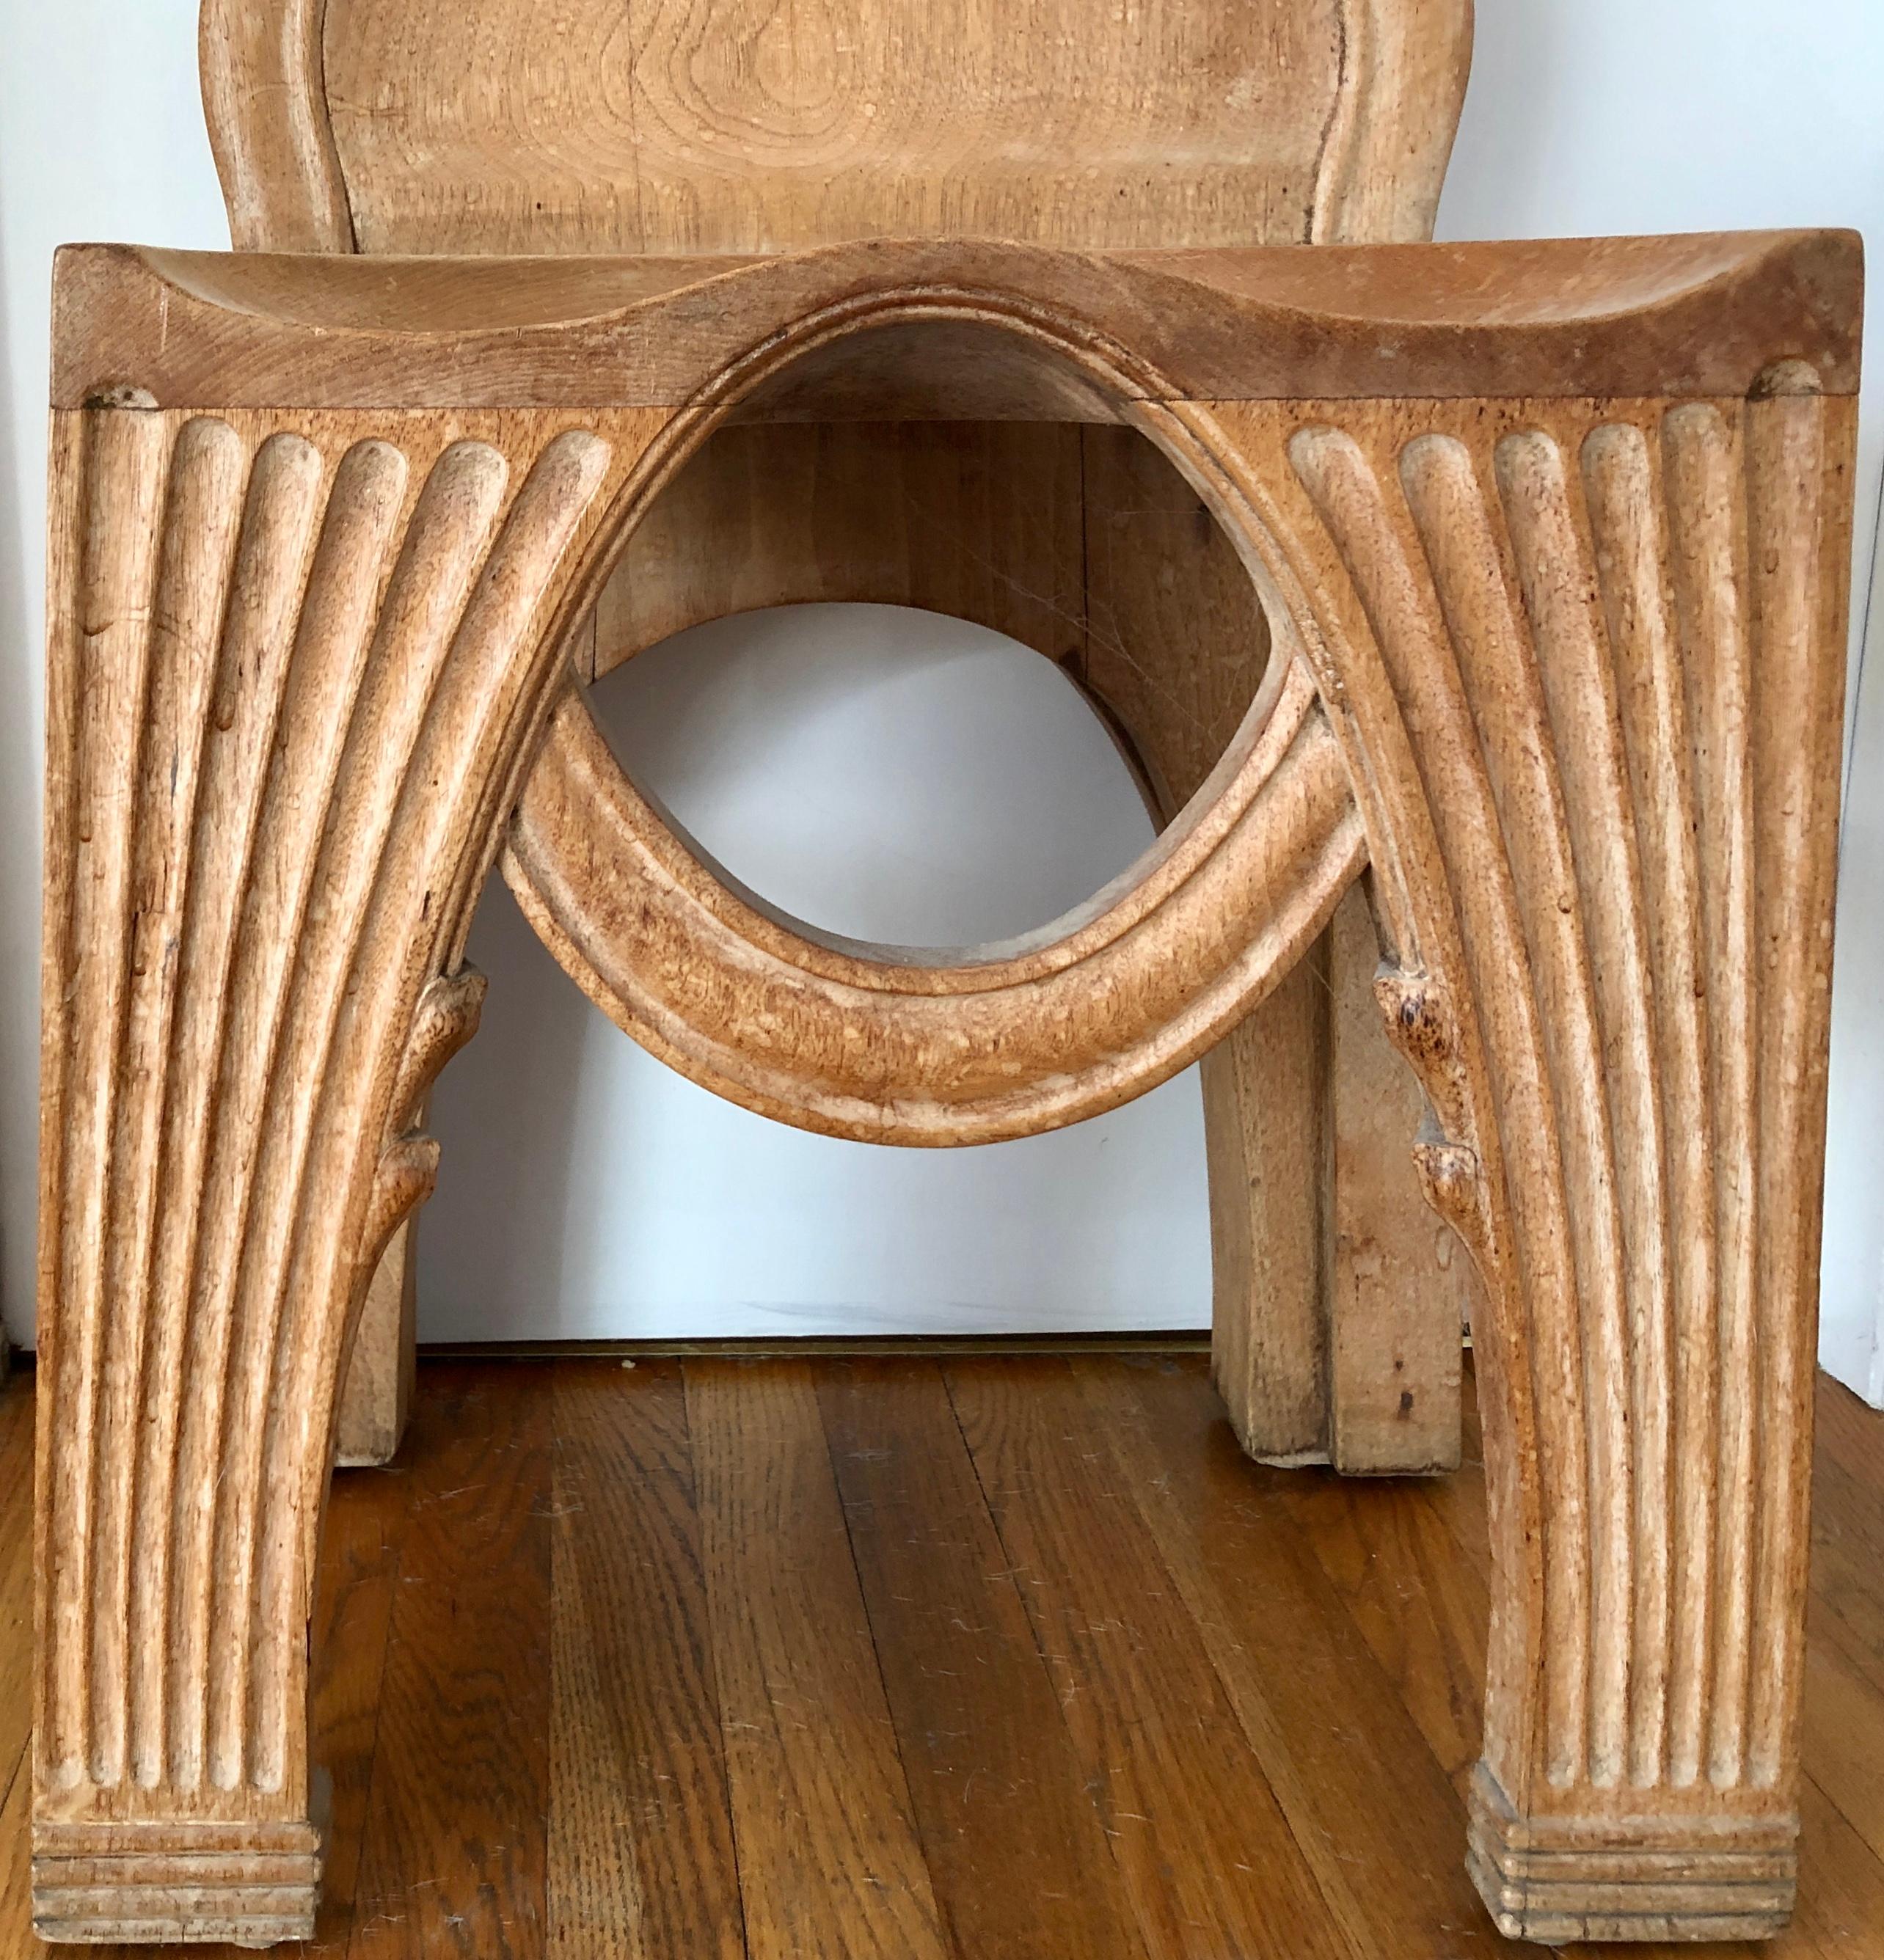 Hand-Crafted Rare wooden replica of the “King Minos Throne” from the Palace at Knossos